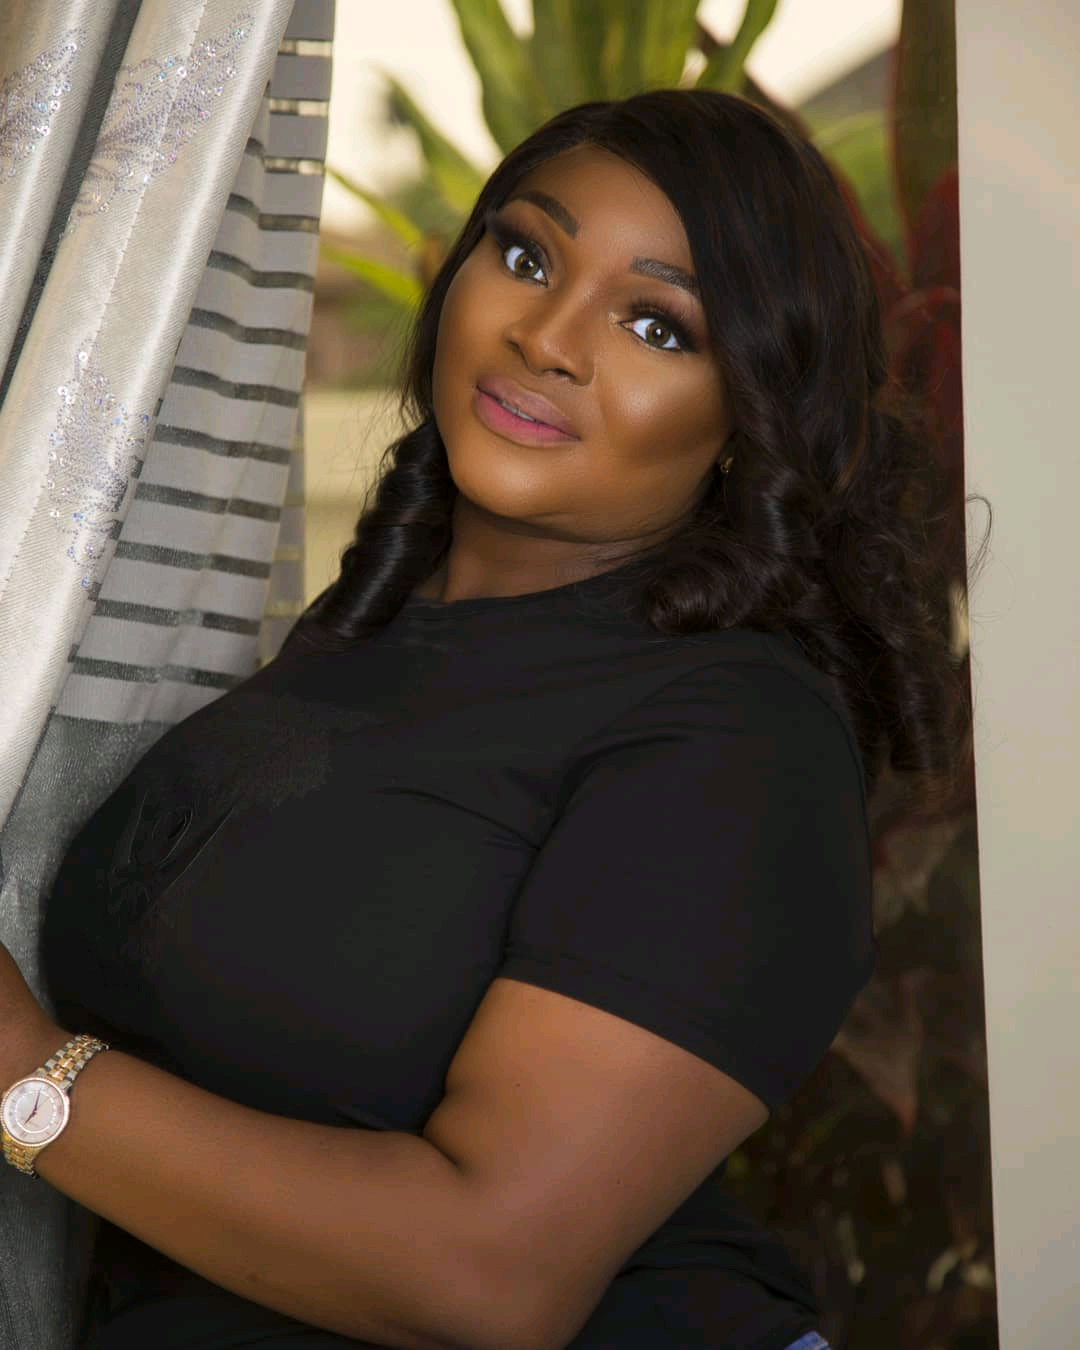 It's Not Easy To Cope With Sexual Harassment In Nollywood - Actress Chioma Okoye